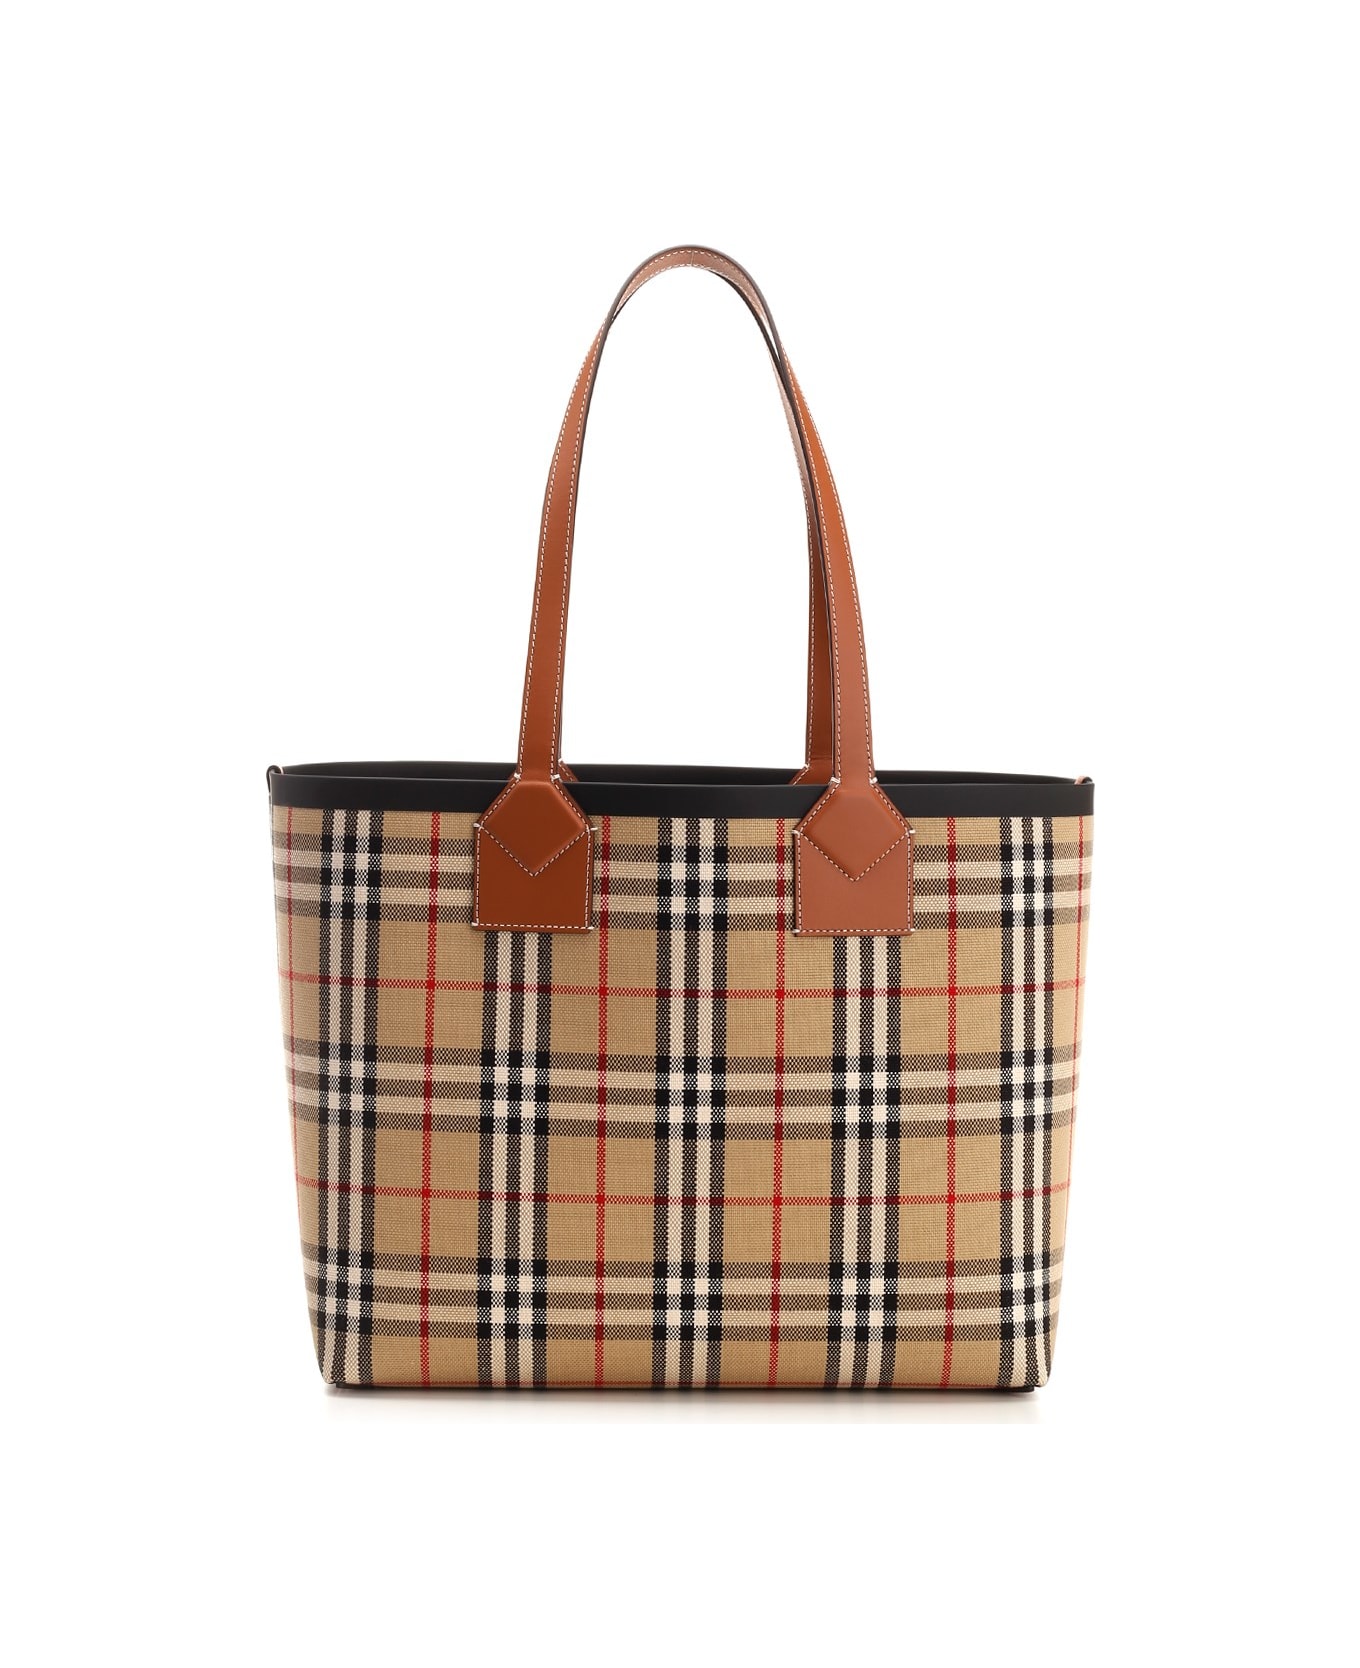 Burberry 'london' Small Tote Bag - Beige